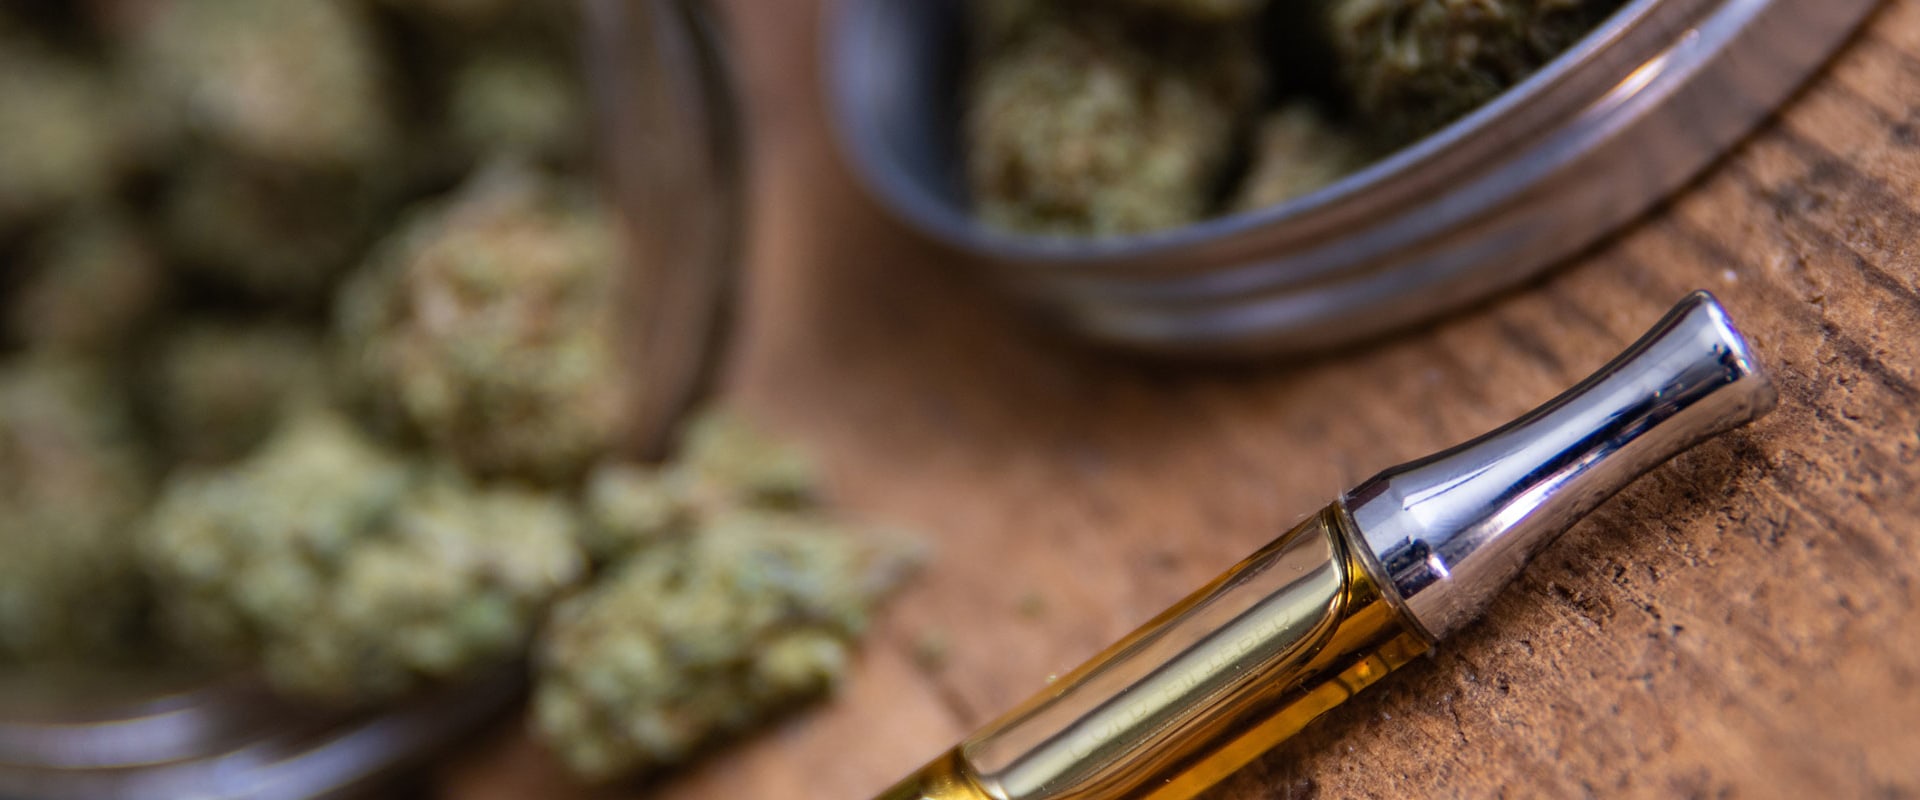 Do You Need THC for CBD to Work?